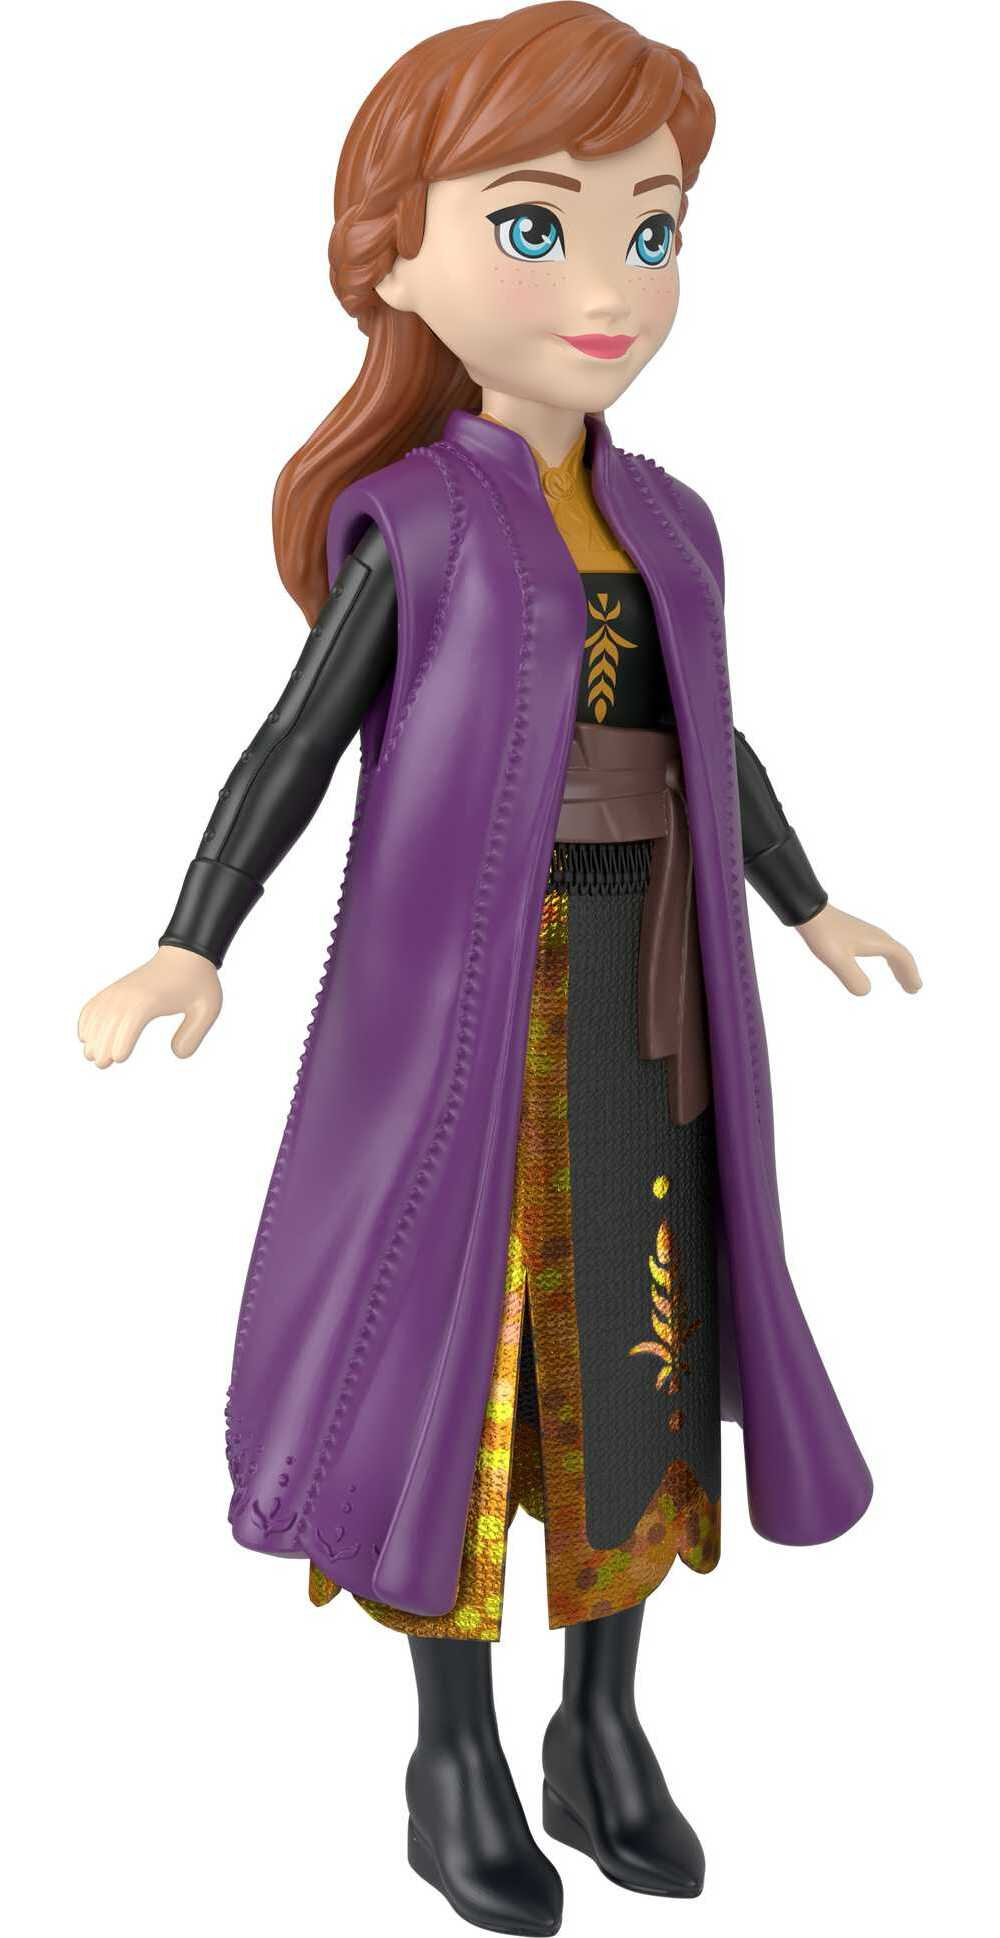 Disney Frozen Anna Small Doll in Travel Look, Posable with Removable Cape & Skirt - image 3 of 6